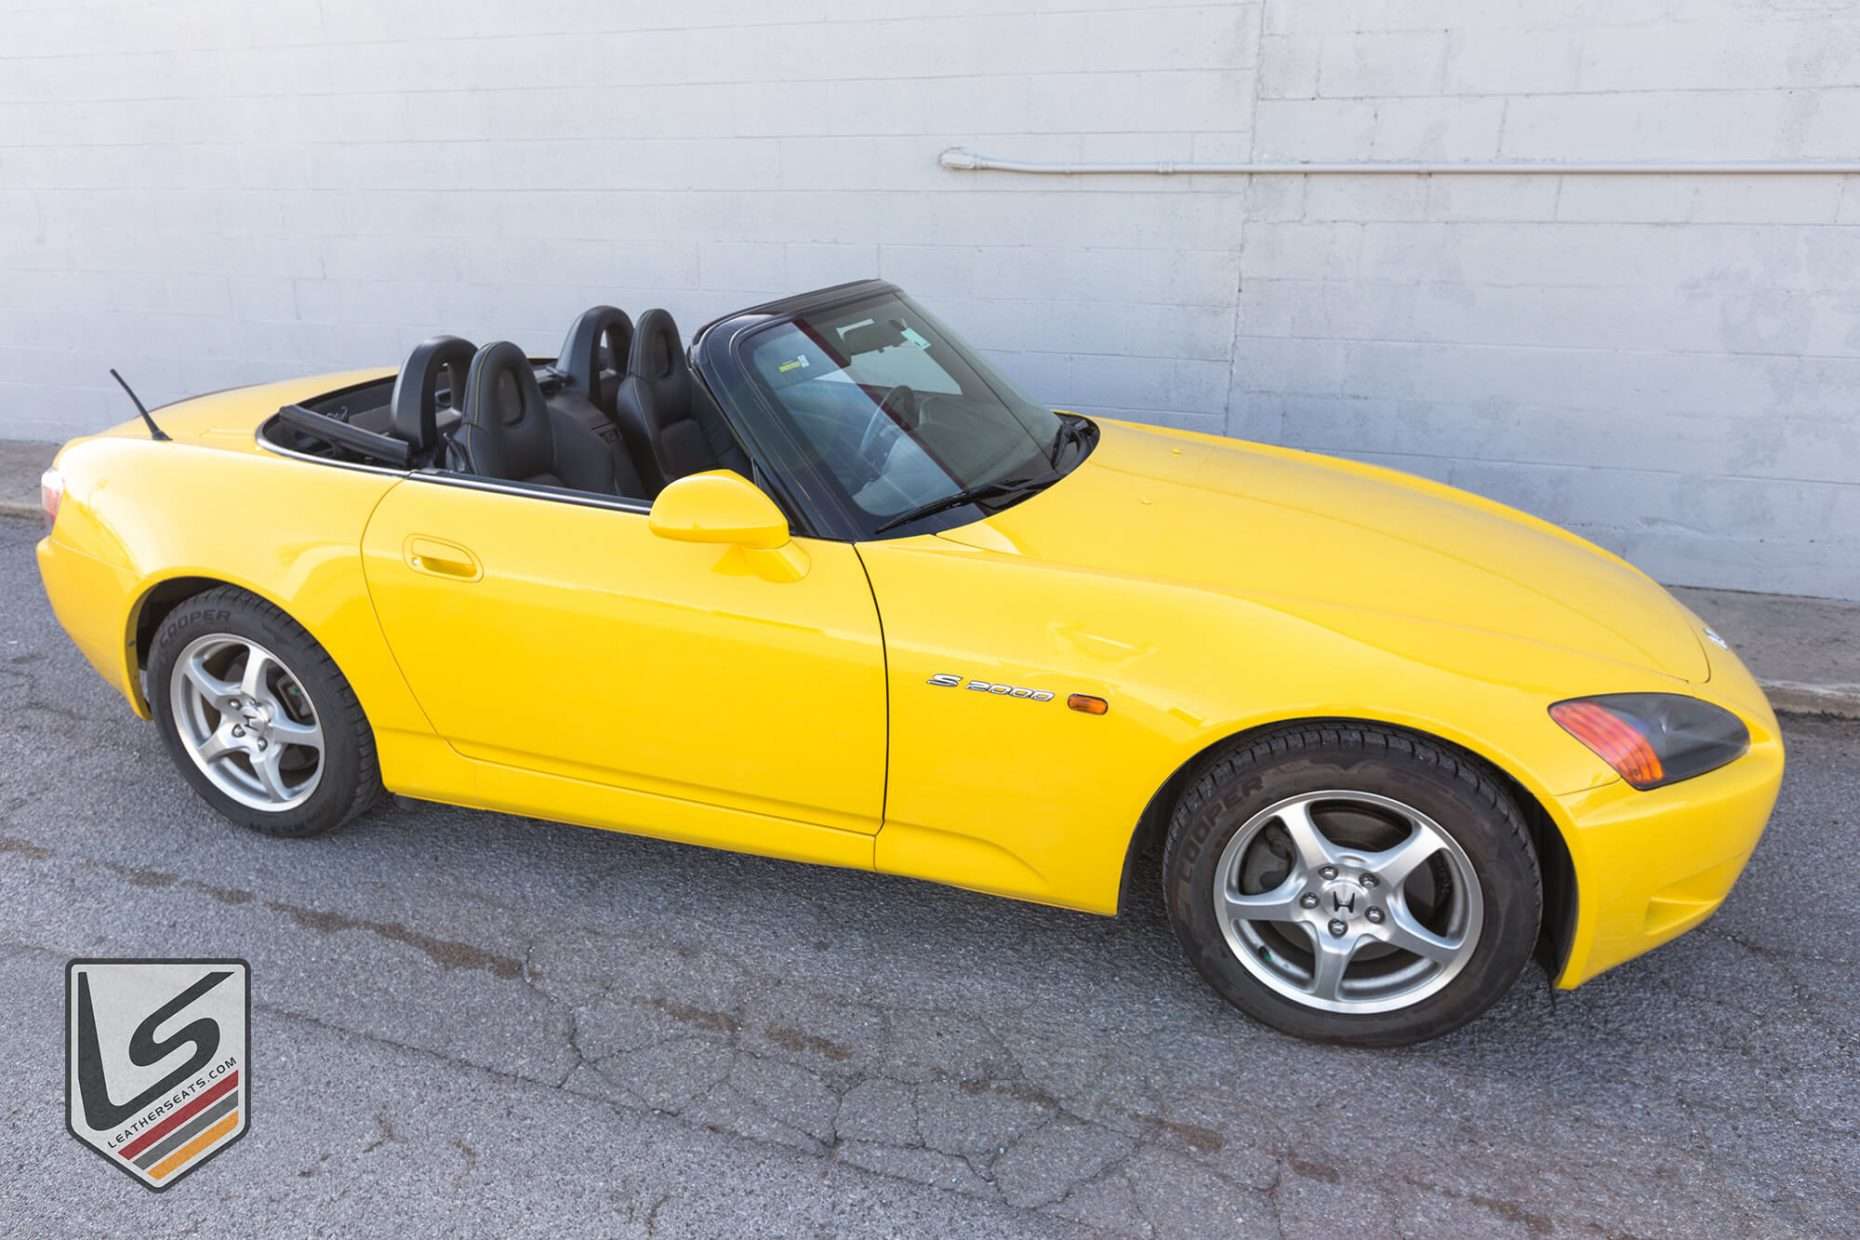 2000-2005 Honda S2000 Convertible Exterior with installed leatherseats.com upholstery